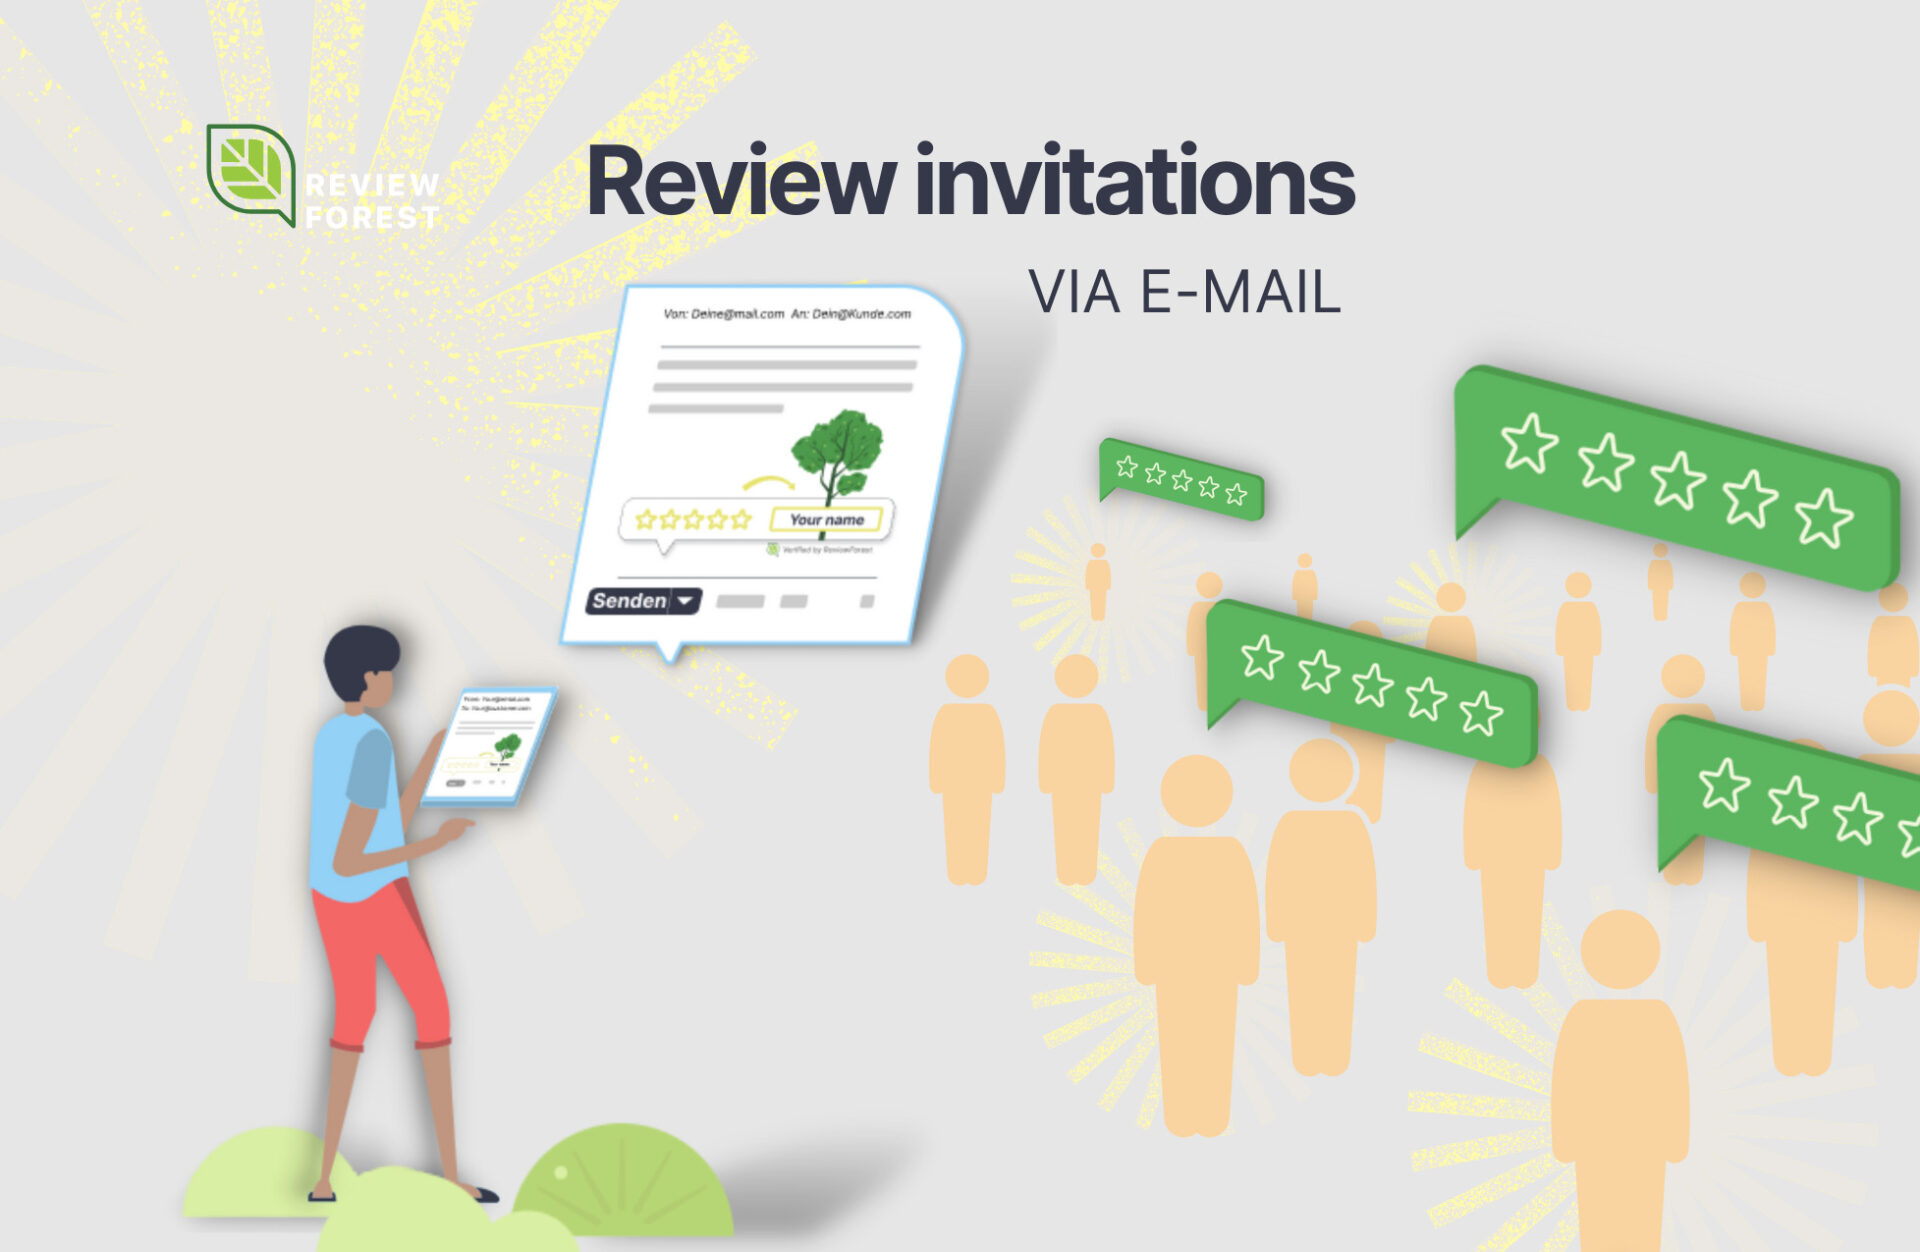 Create review requests by email